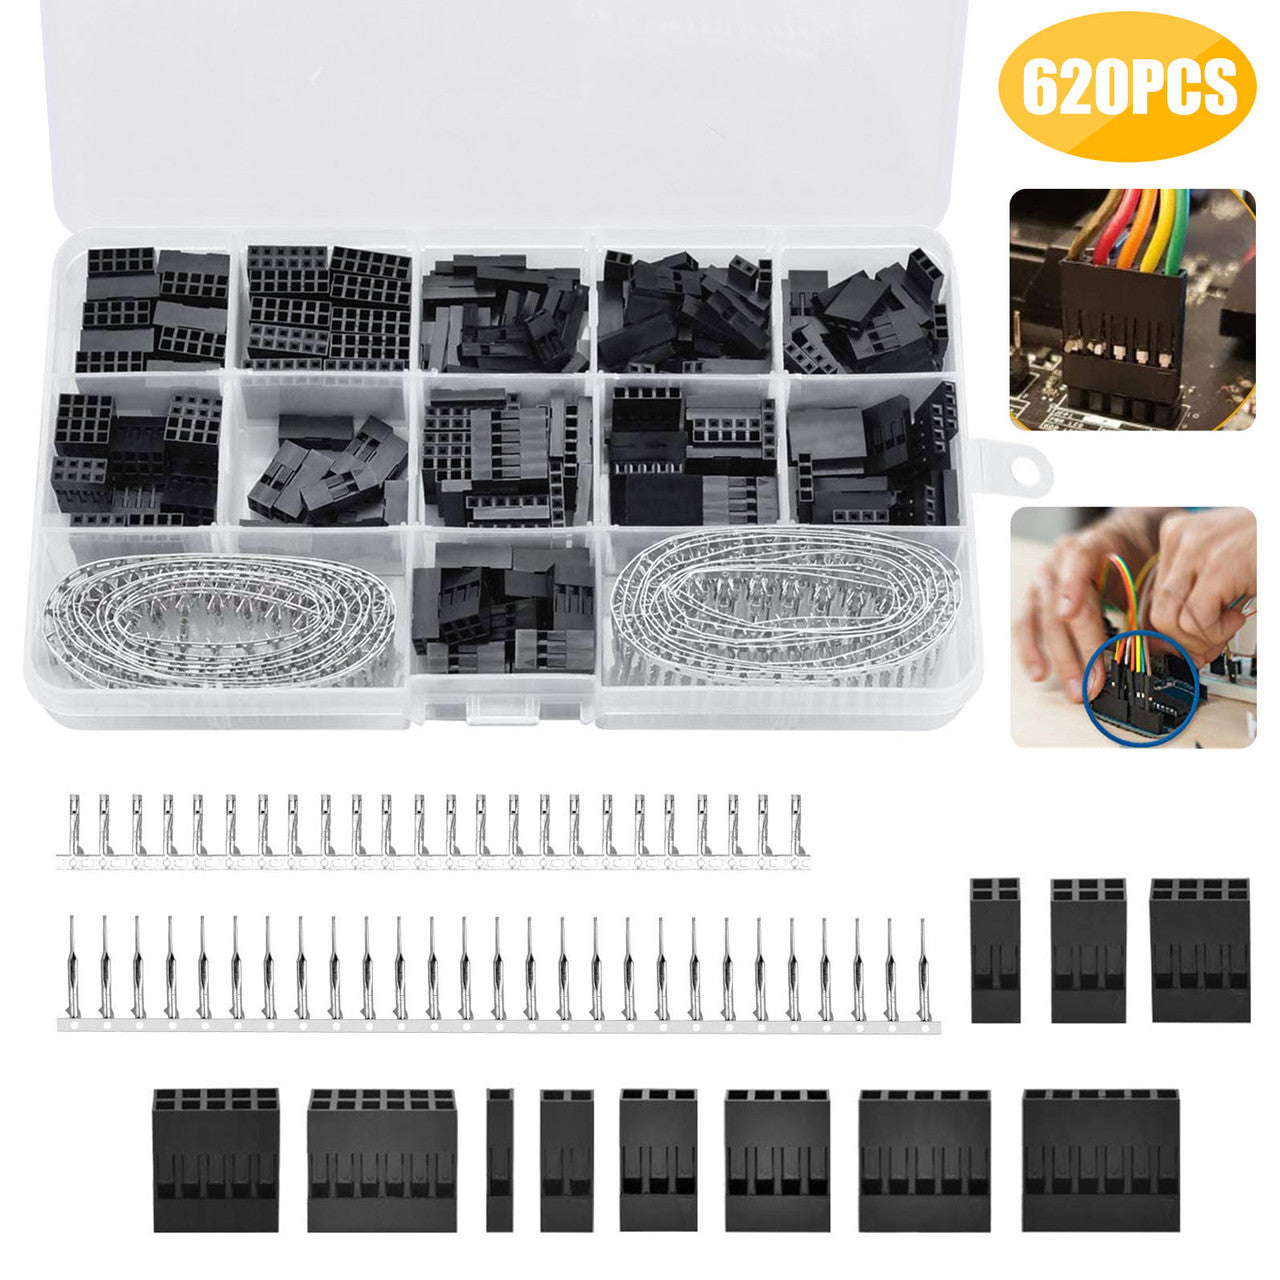 Assorted 2.54mm Pitch Connector for DIY Projects and Dupont Connectors, 620Pcs